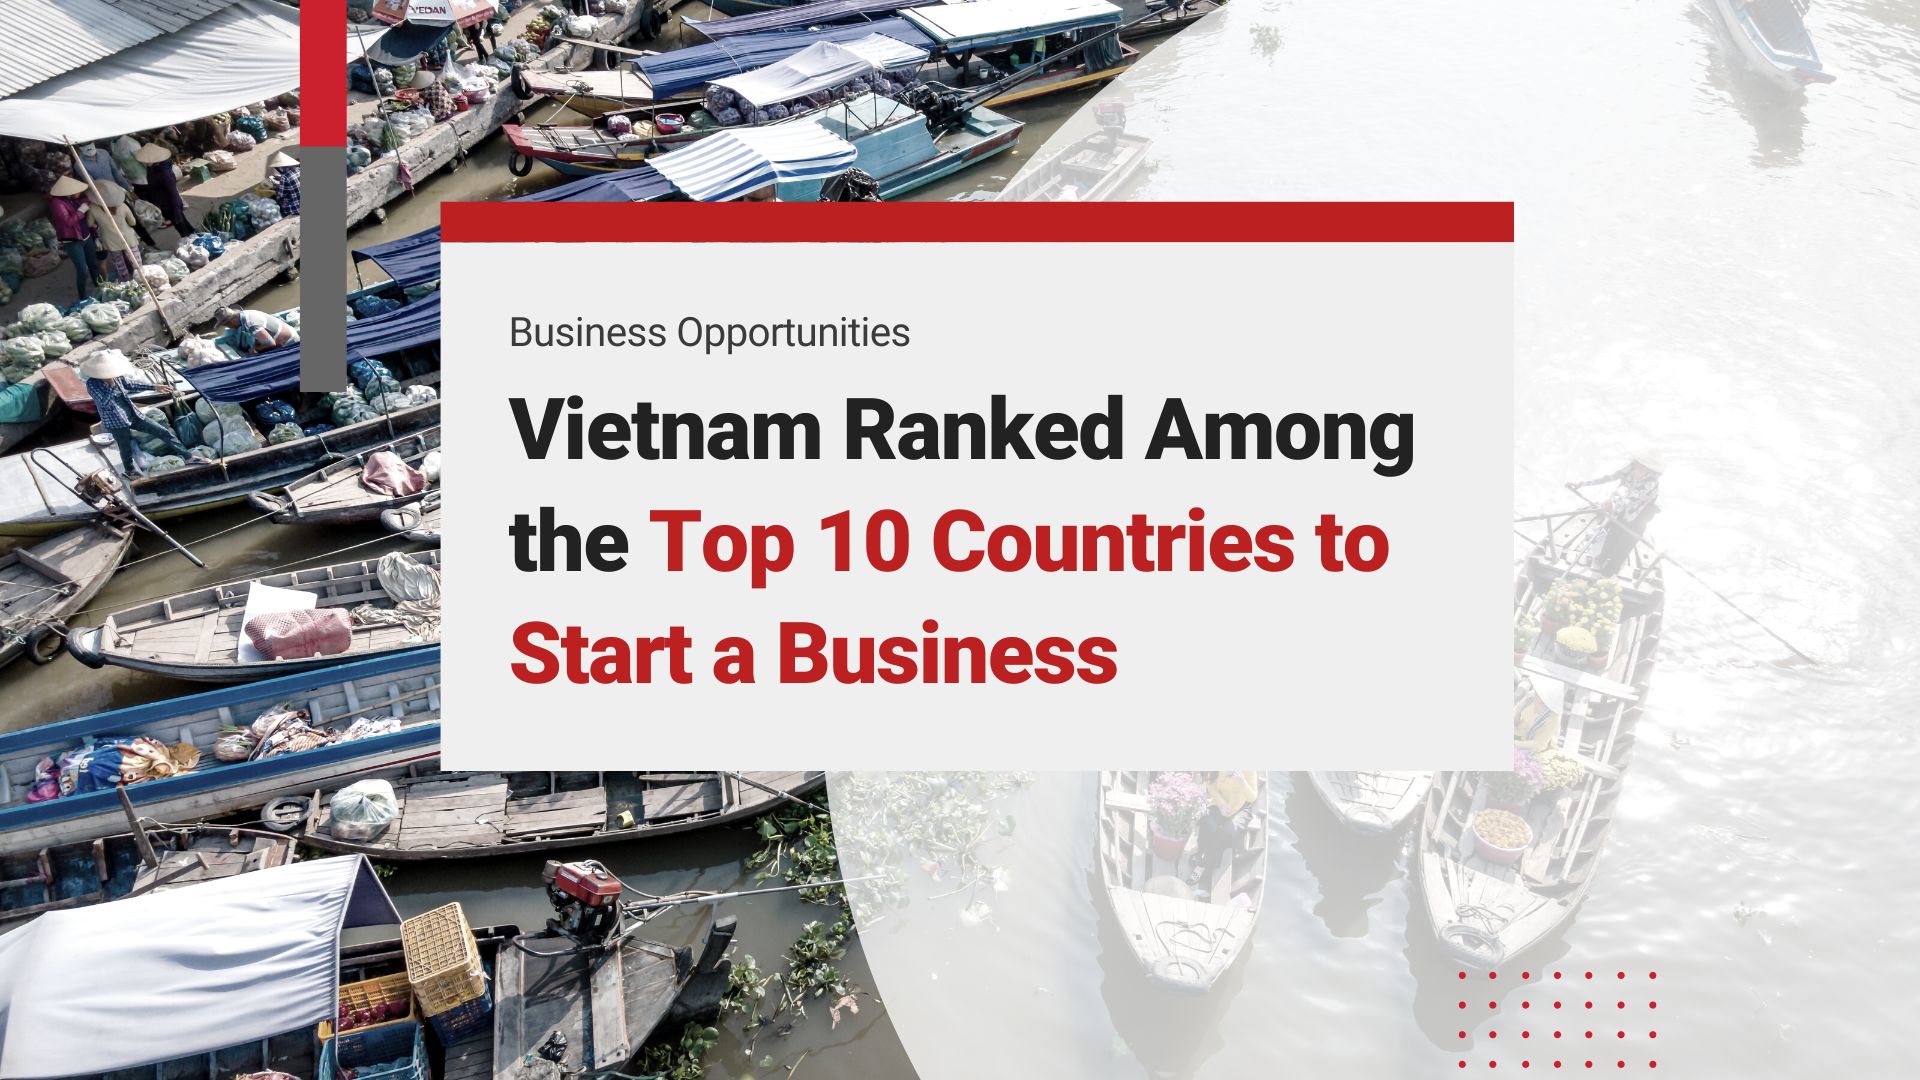 Vietnam Ranked Among the Top 10 Countries to Start a Business – Find Out Why